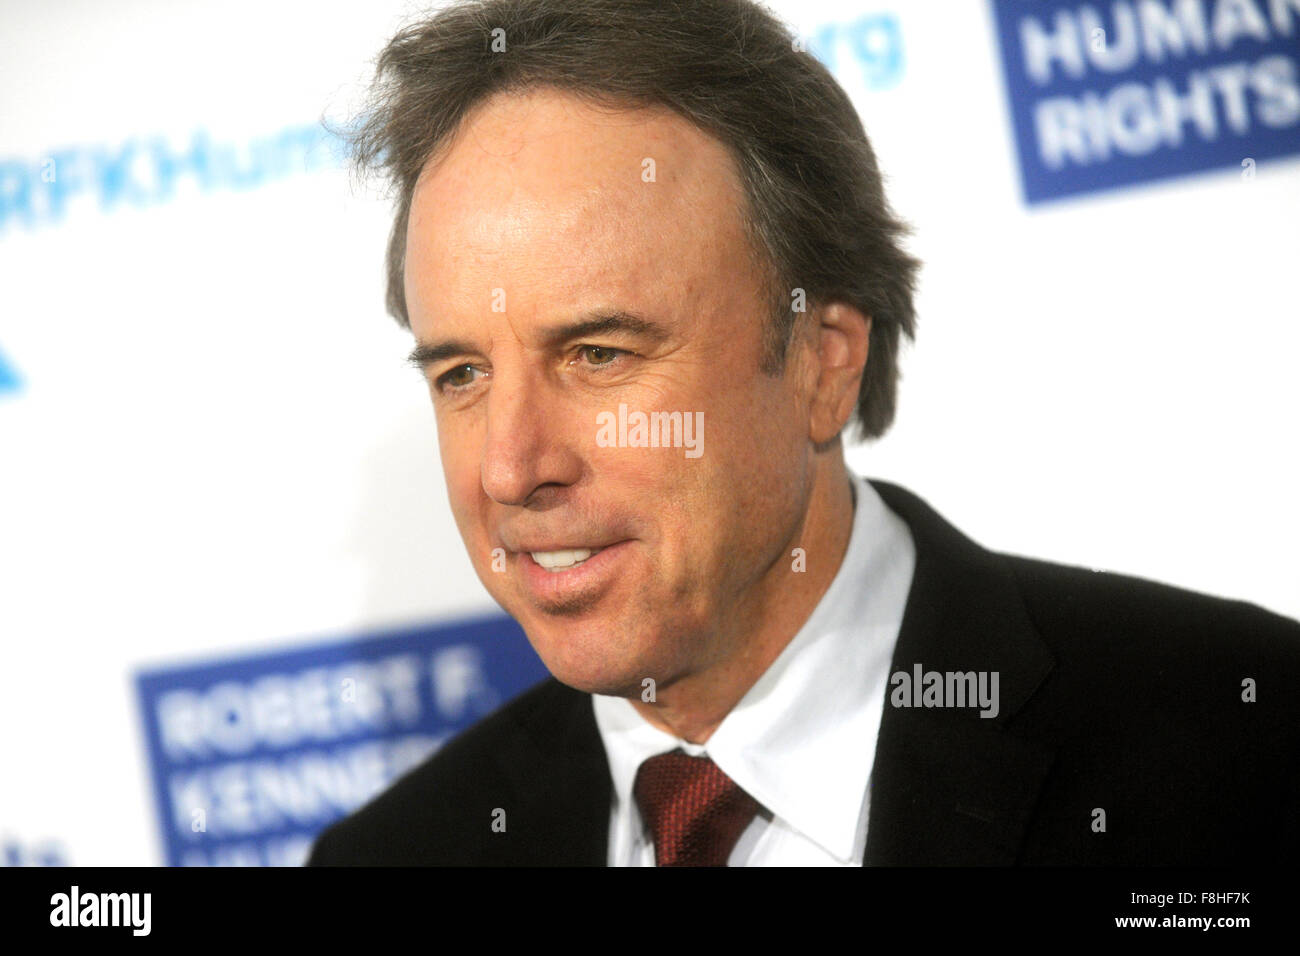 Kevin Nealon attends the Robert F. Kennedy human rights 2015 Ripple of Hope awards at New York Hilton Midtown on December 8, 2015 in New York City Stock Photo